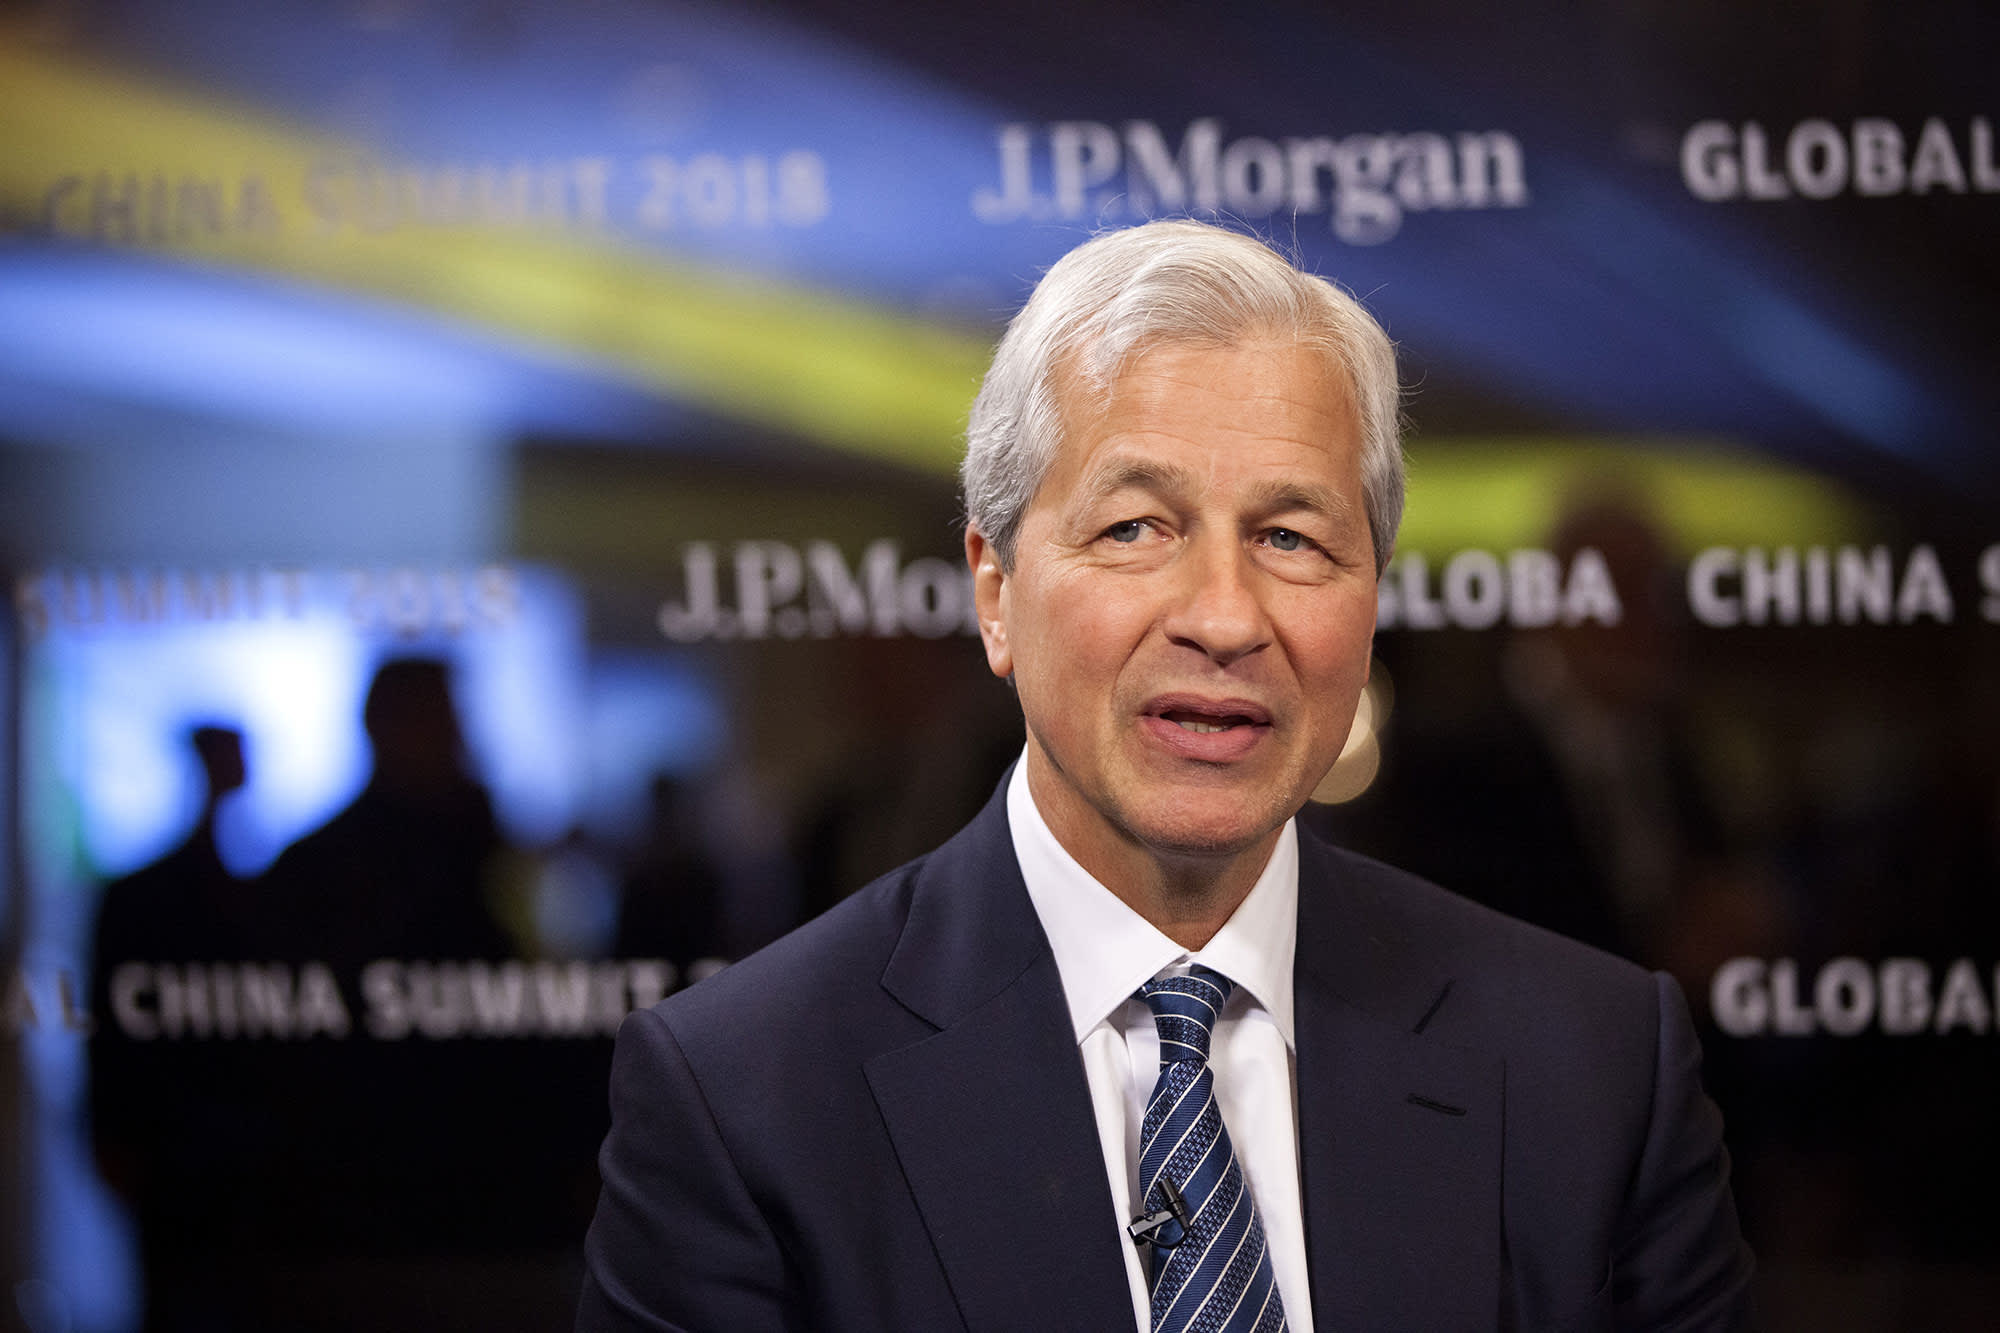 JPMorgan CEO Jamie Dimon on what makes the most successful leaders